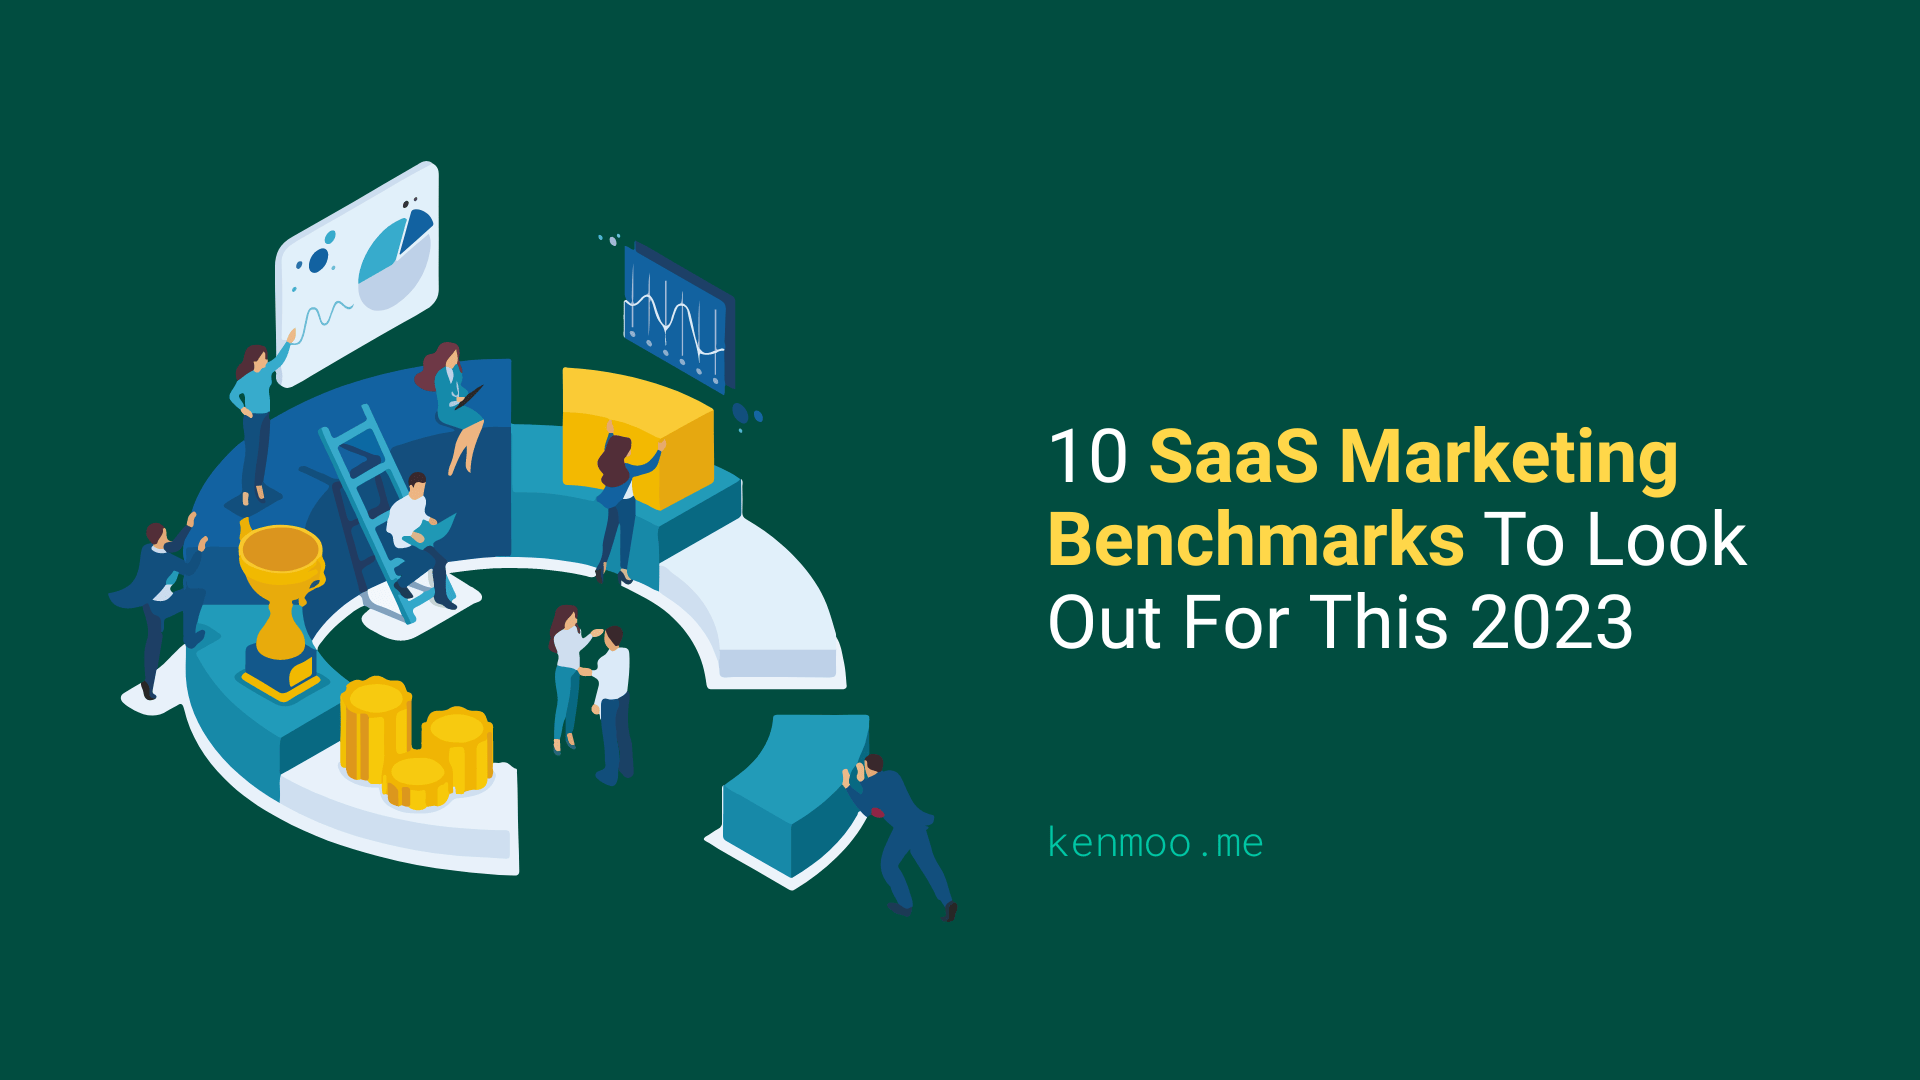 10 SaaS Marketing Benchmarks To Look Out For This 2023